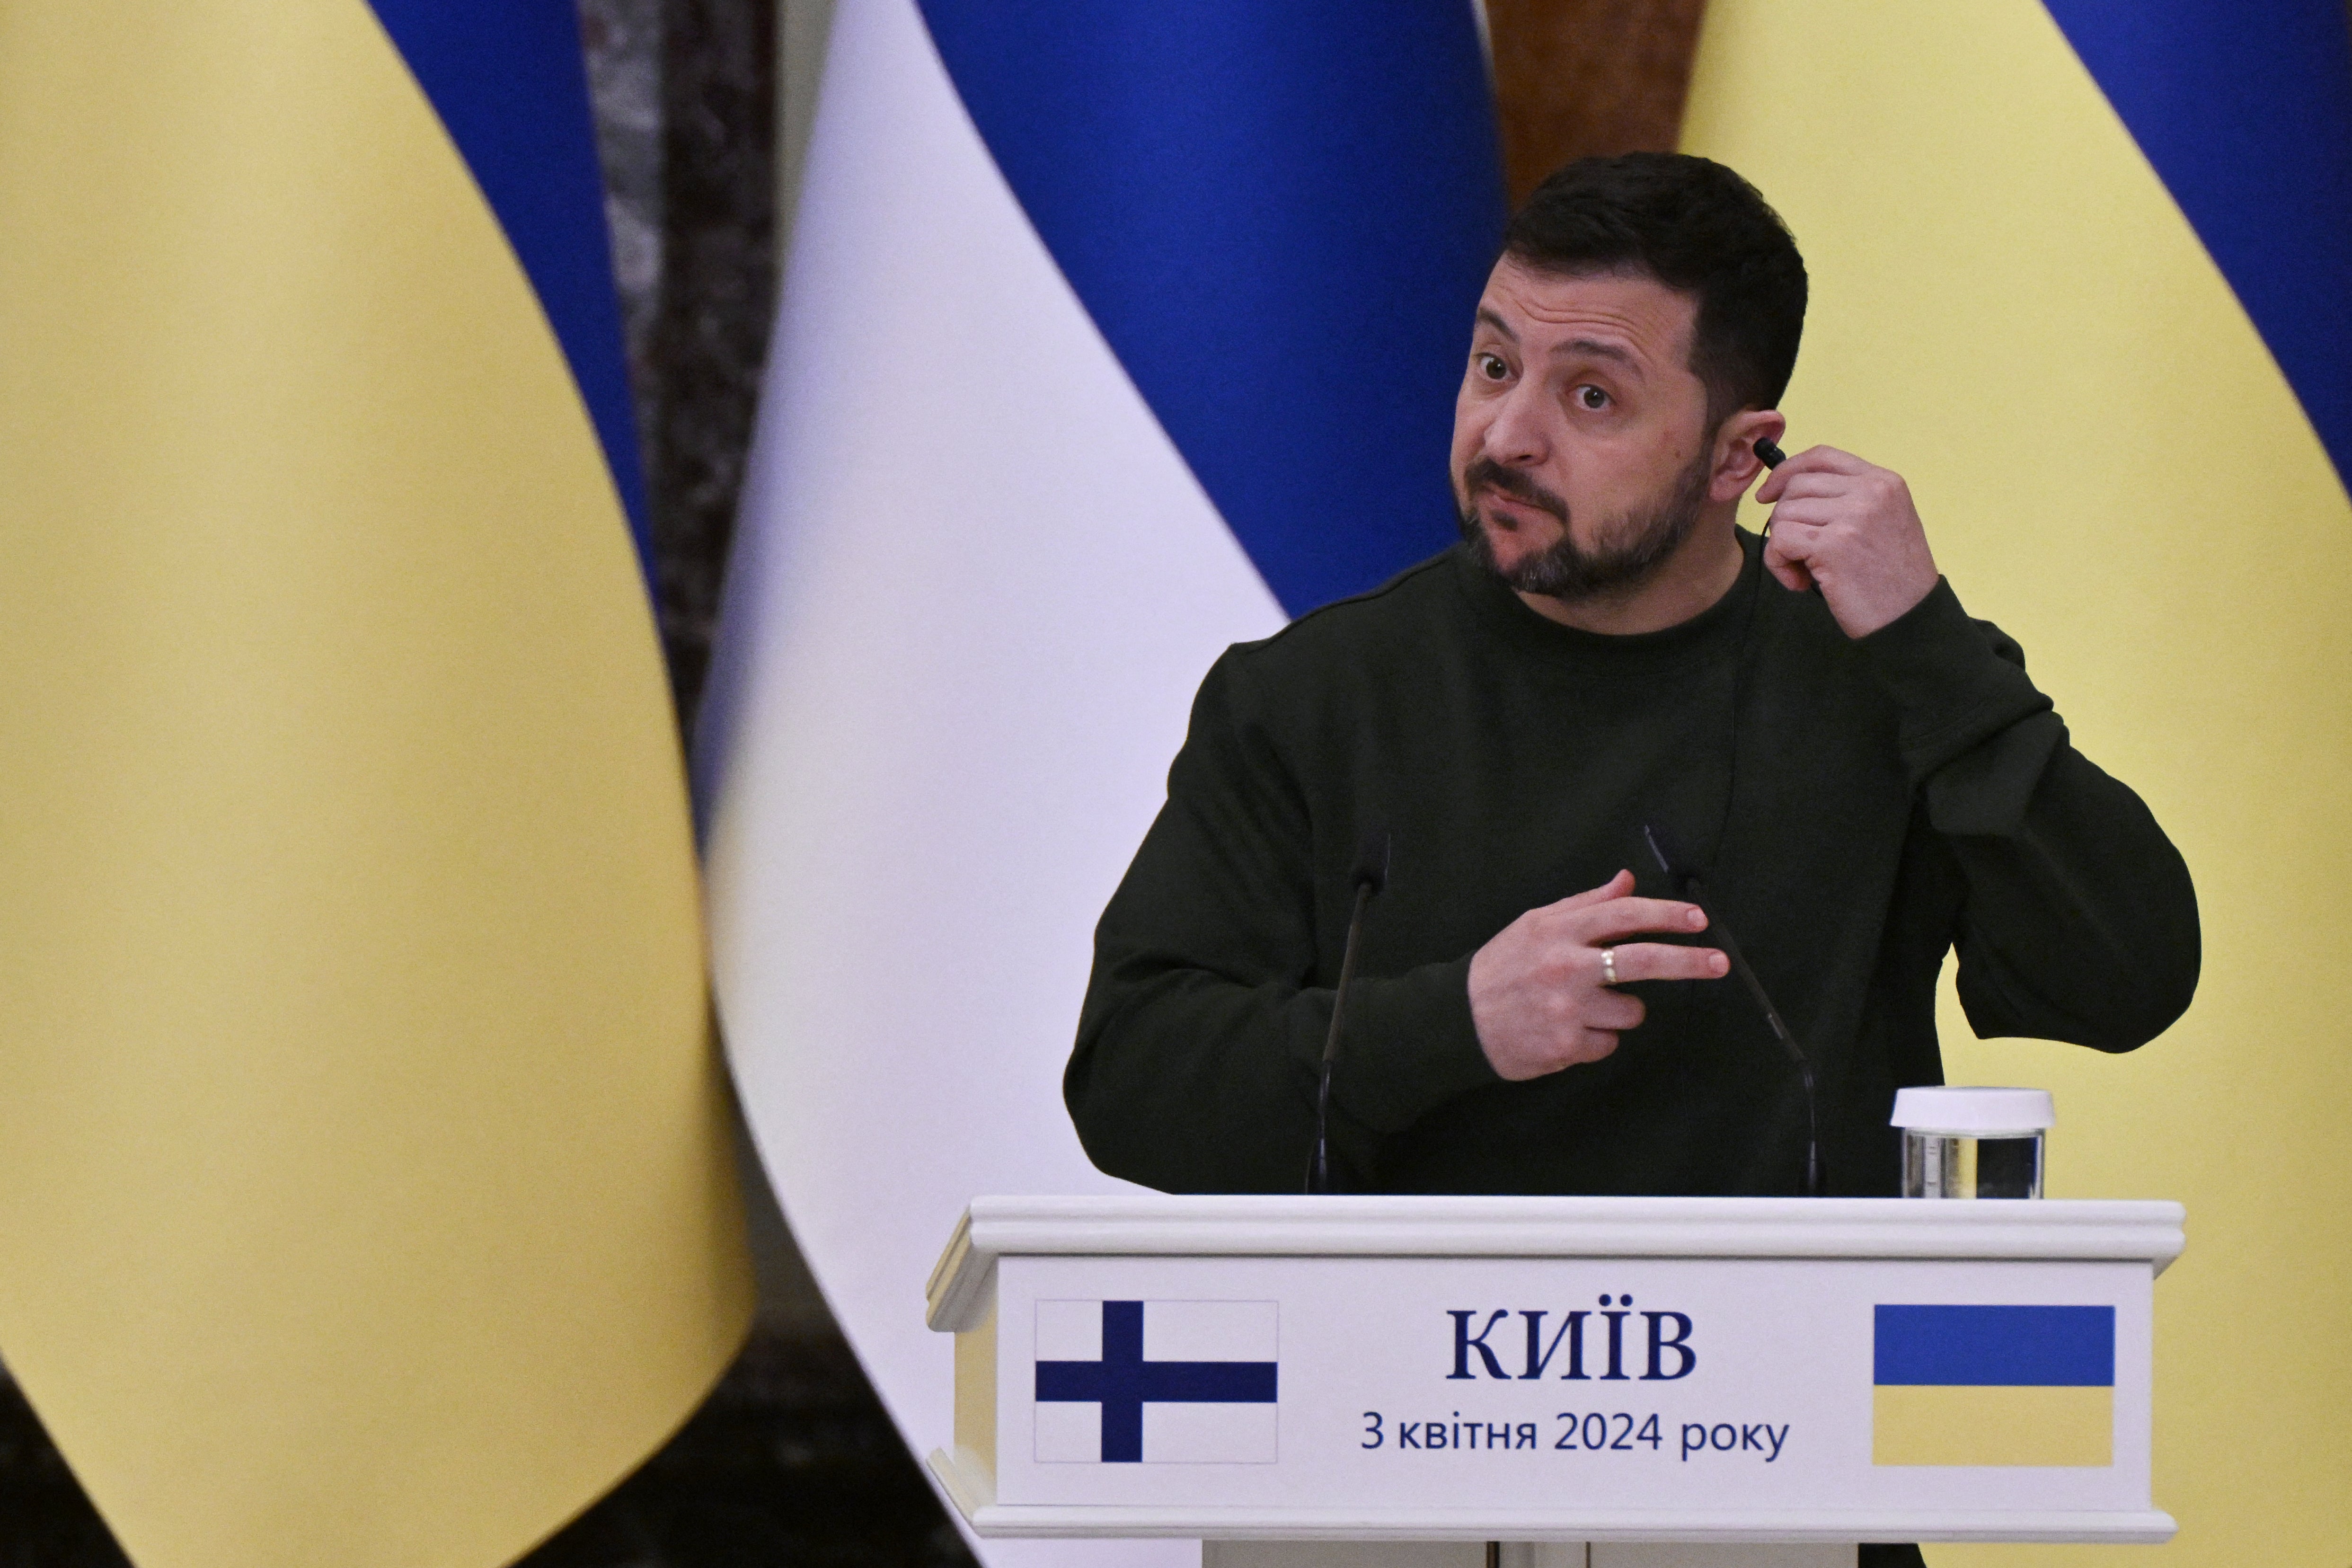 President of Ukraine Volodymyr Zelensky gestures as he attends a joint press conference with president of Finland following their meeting in Kyiv on 3 April 2024